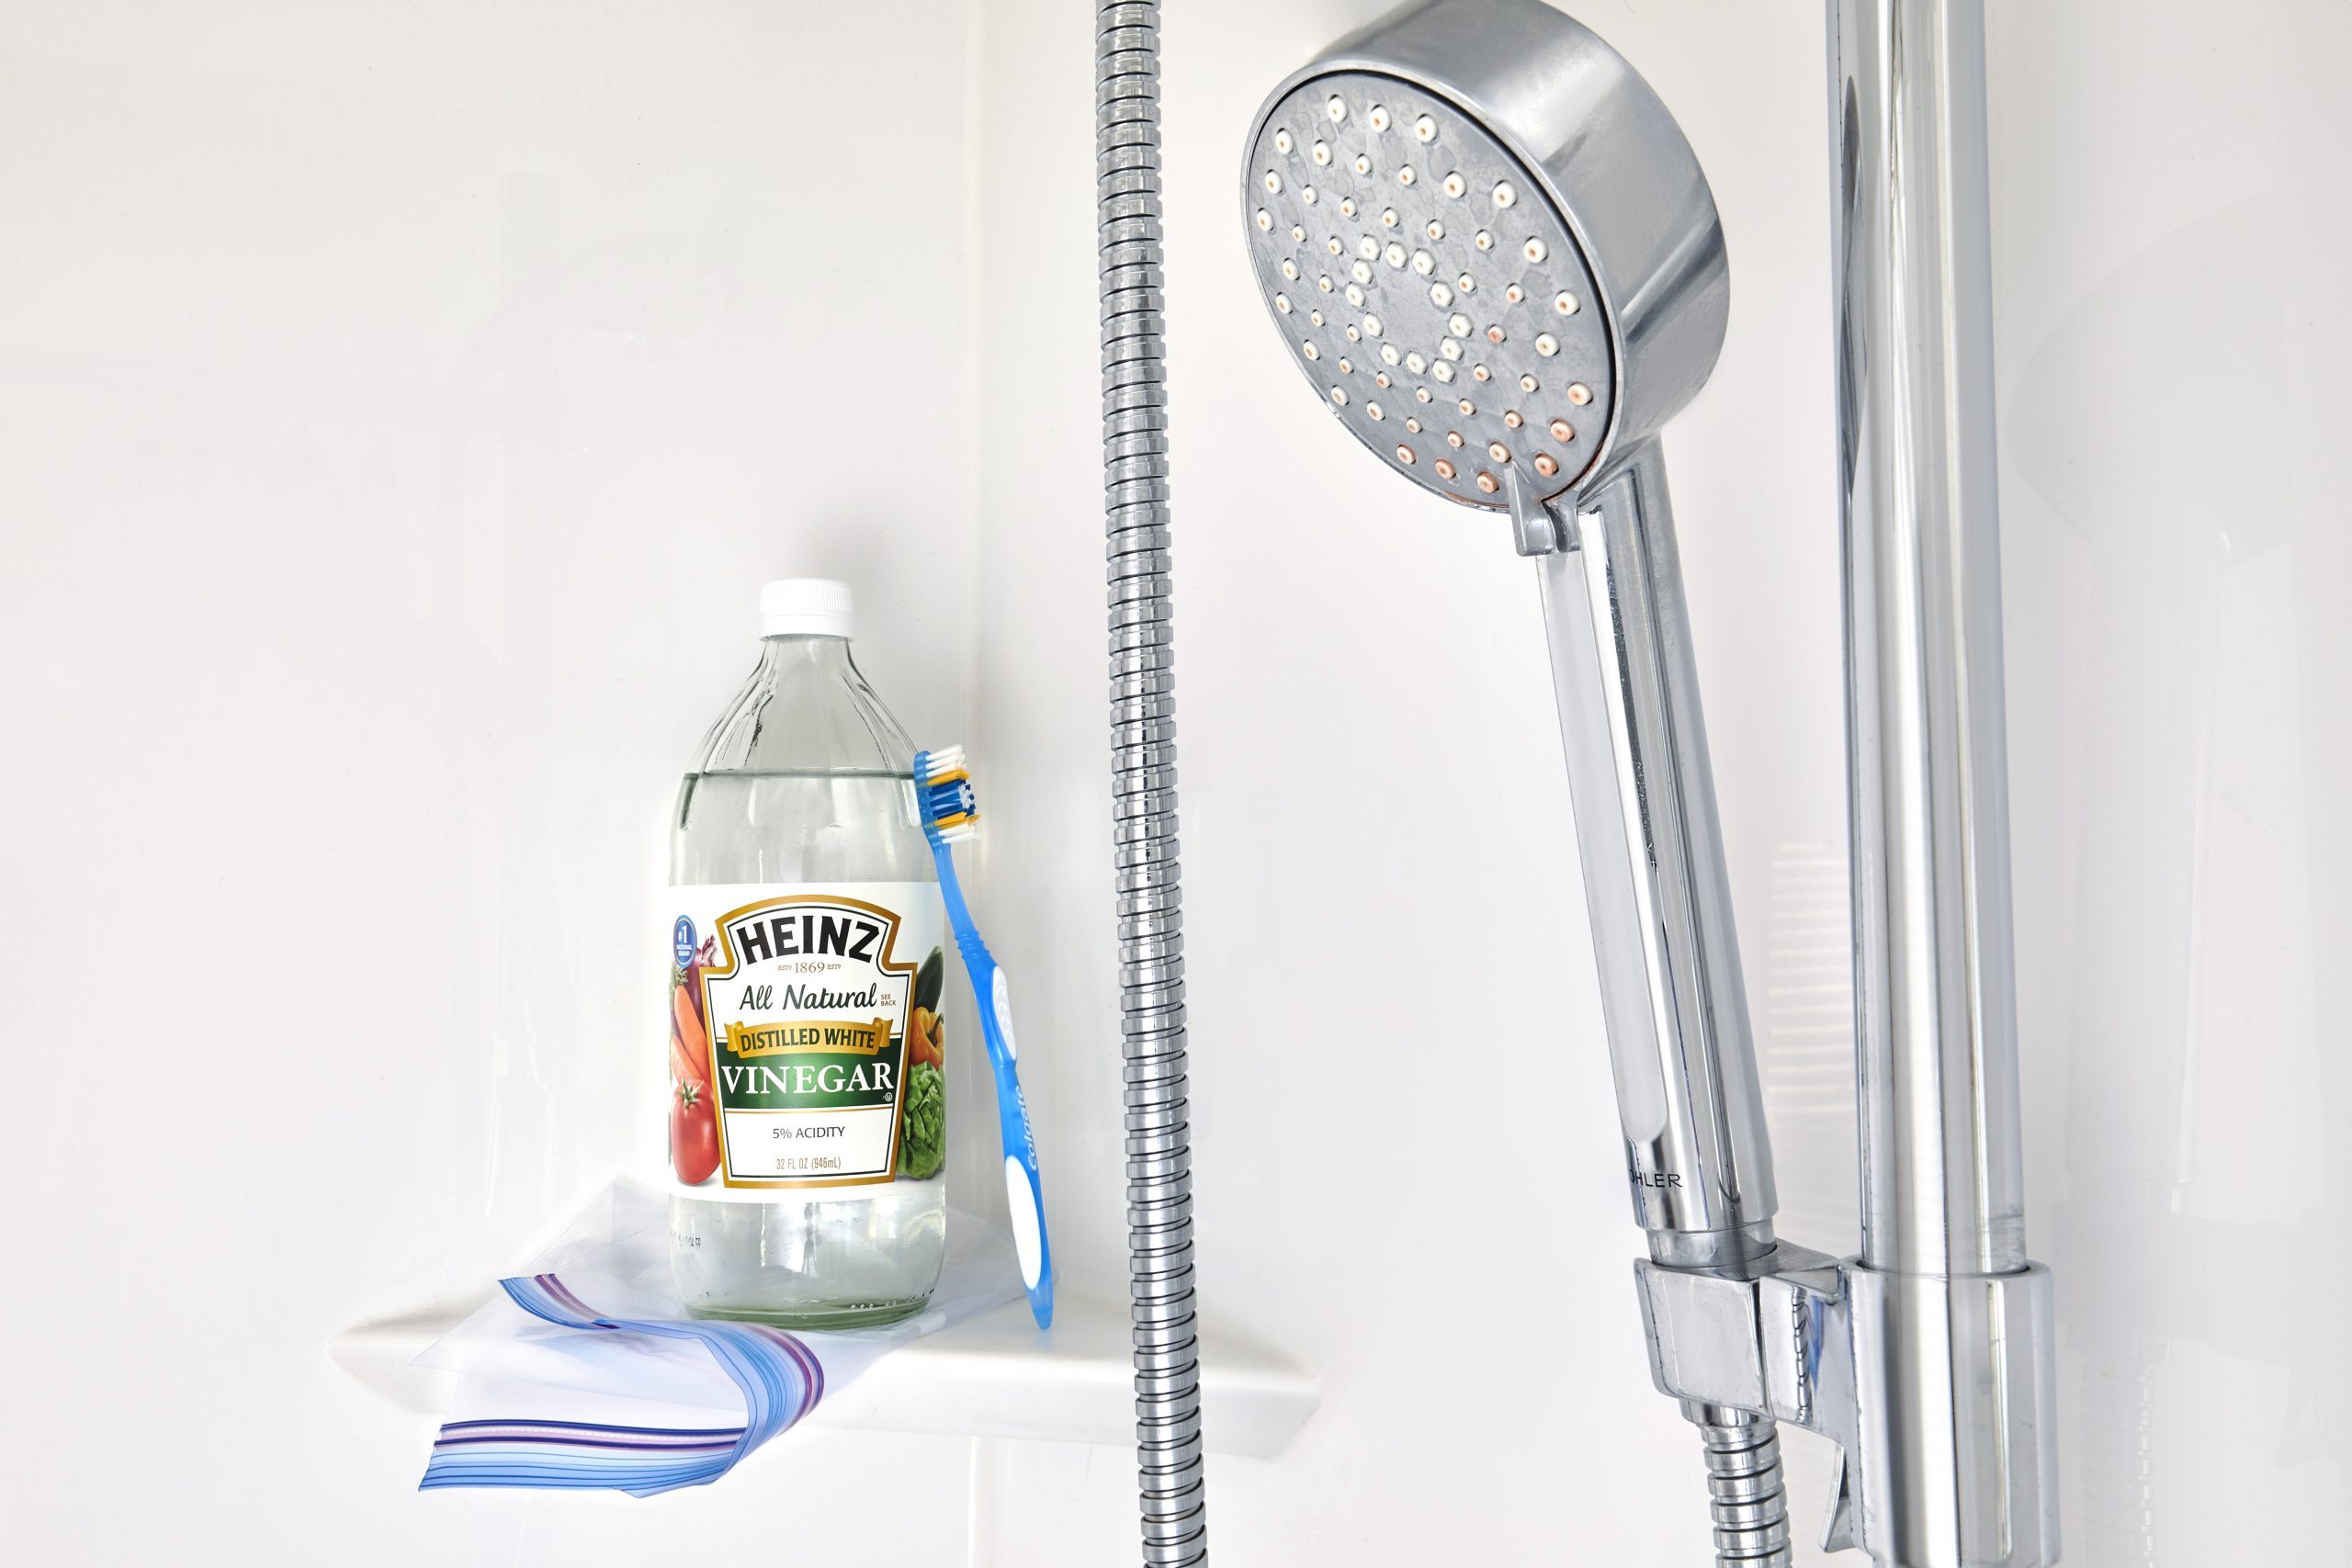 How to Clean a Shower Head: The 2 Best Methods to Get the Job Done